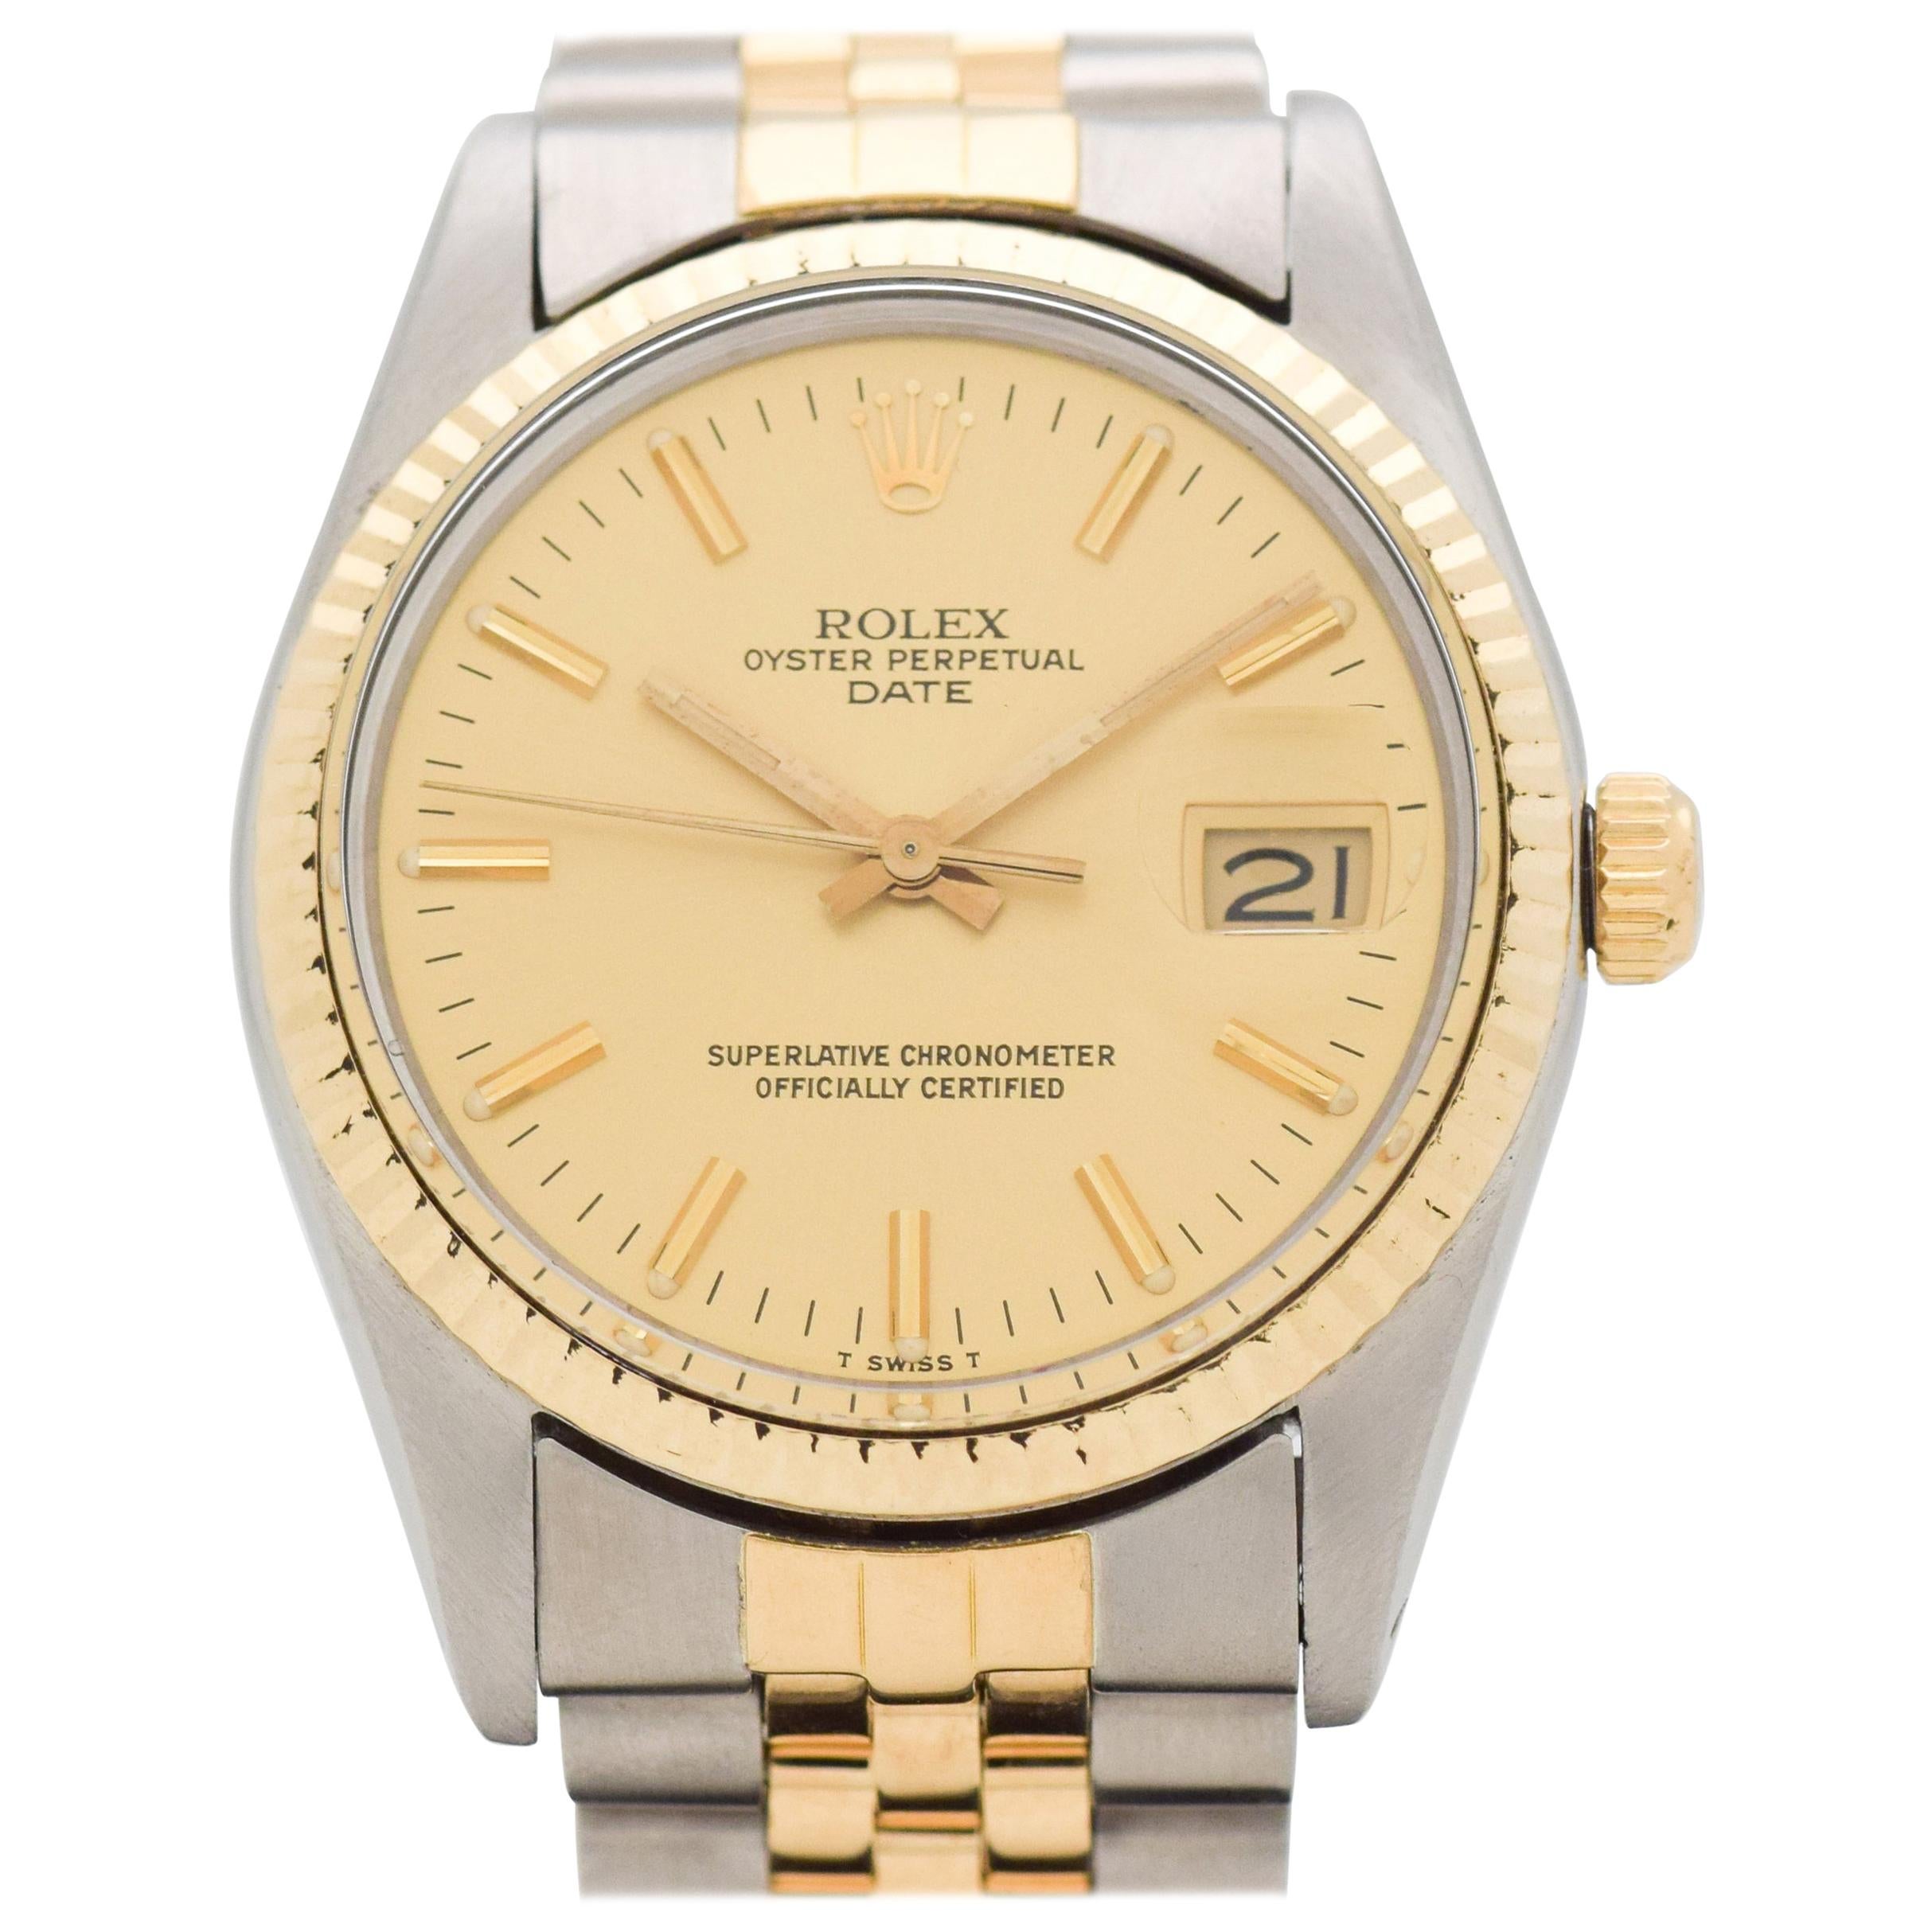 Vintage Rolex Date Automatic Reference 15000 Two-Tone Watch, 1981